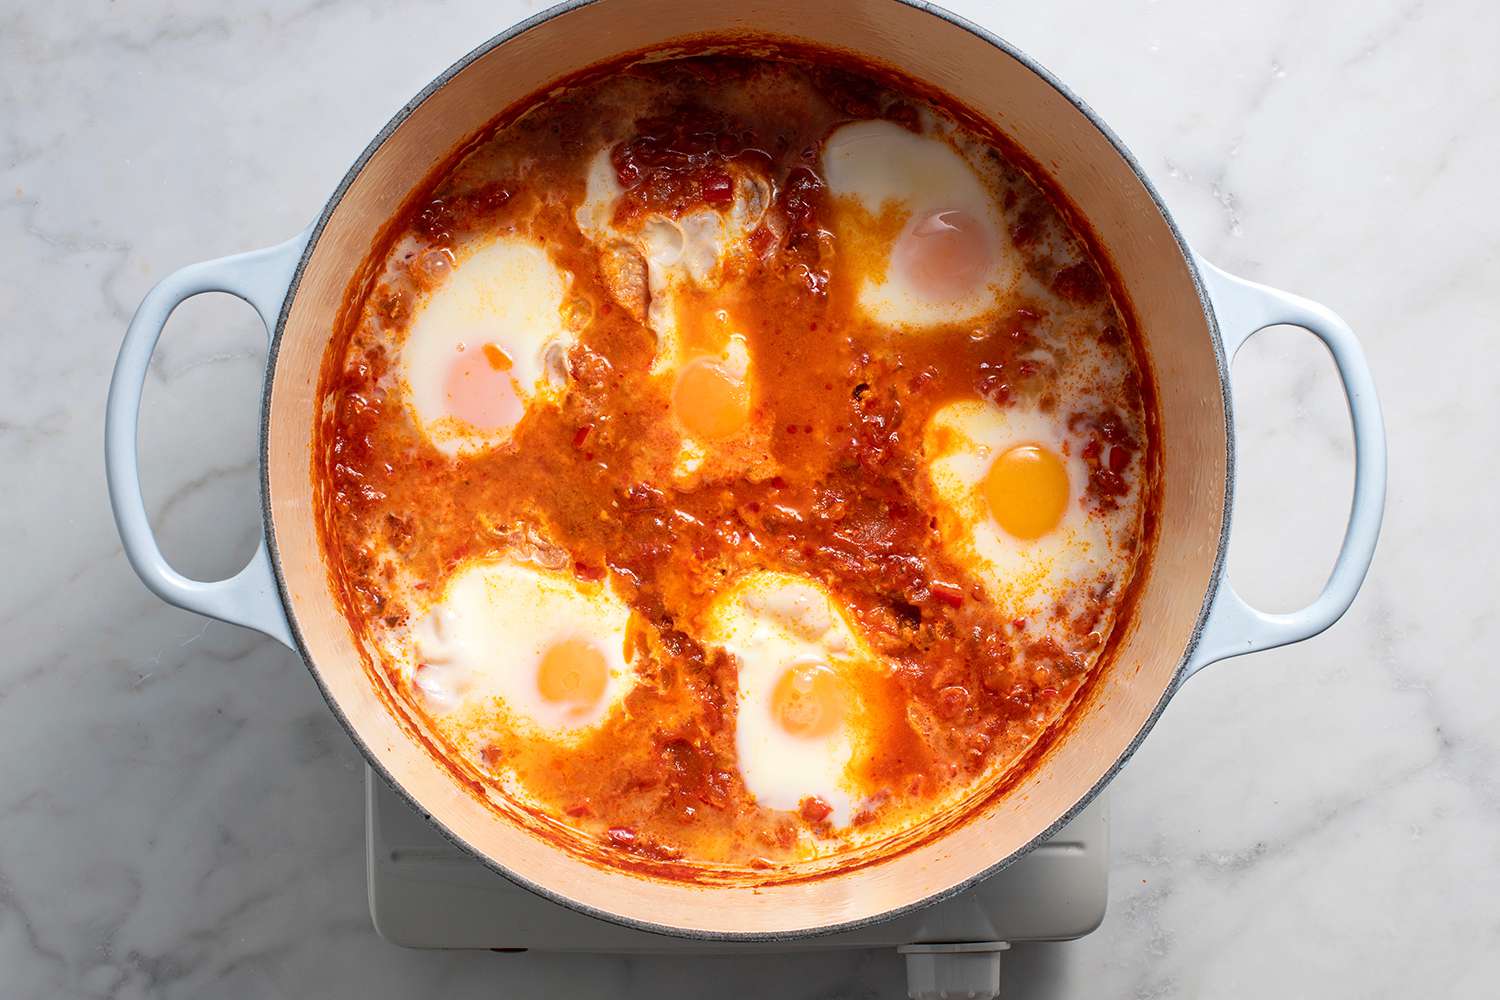 Eggs cooking in the tomato sauce in a pot on a burner 